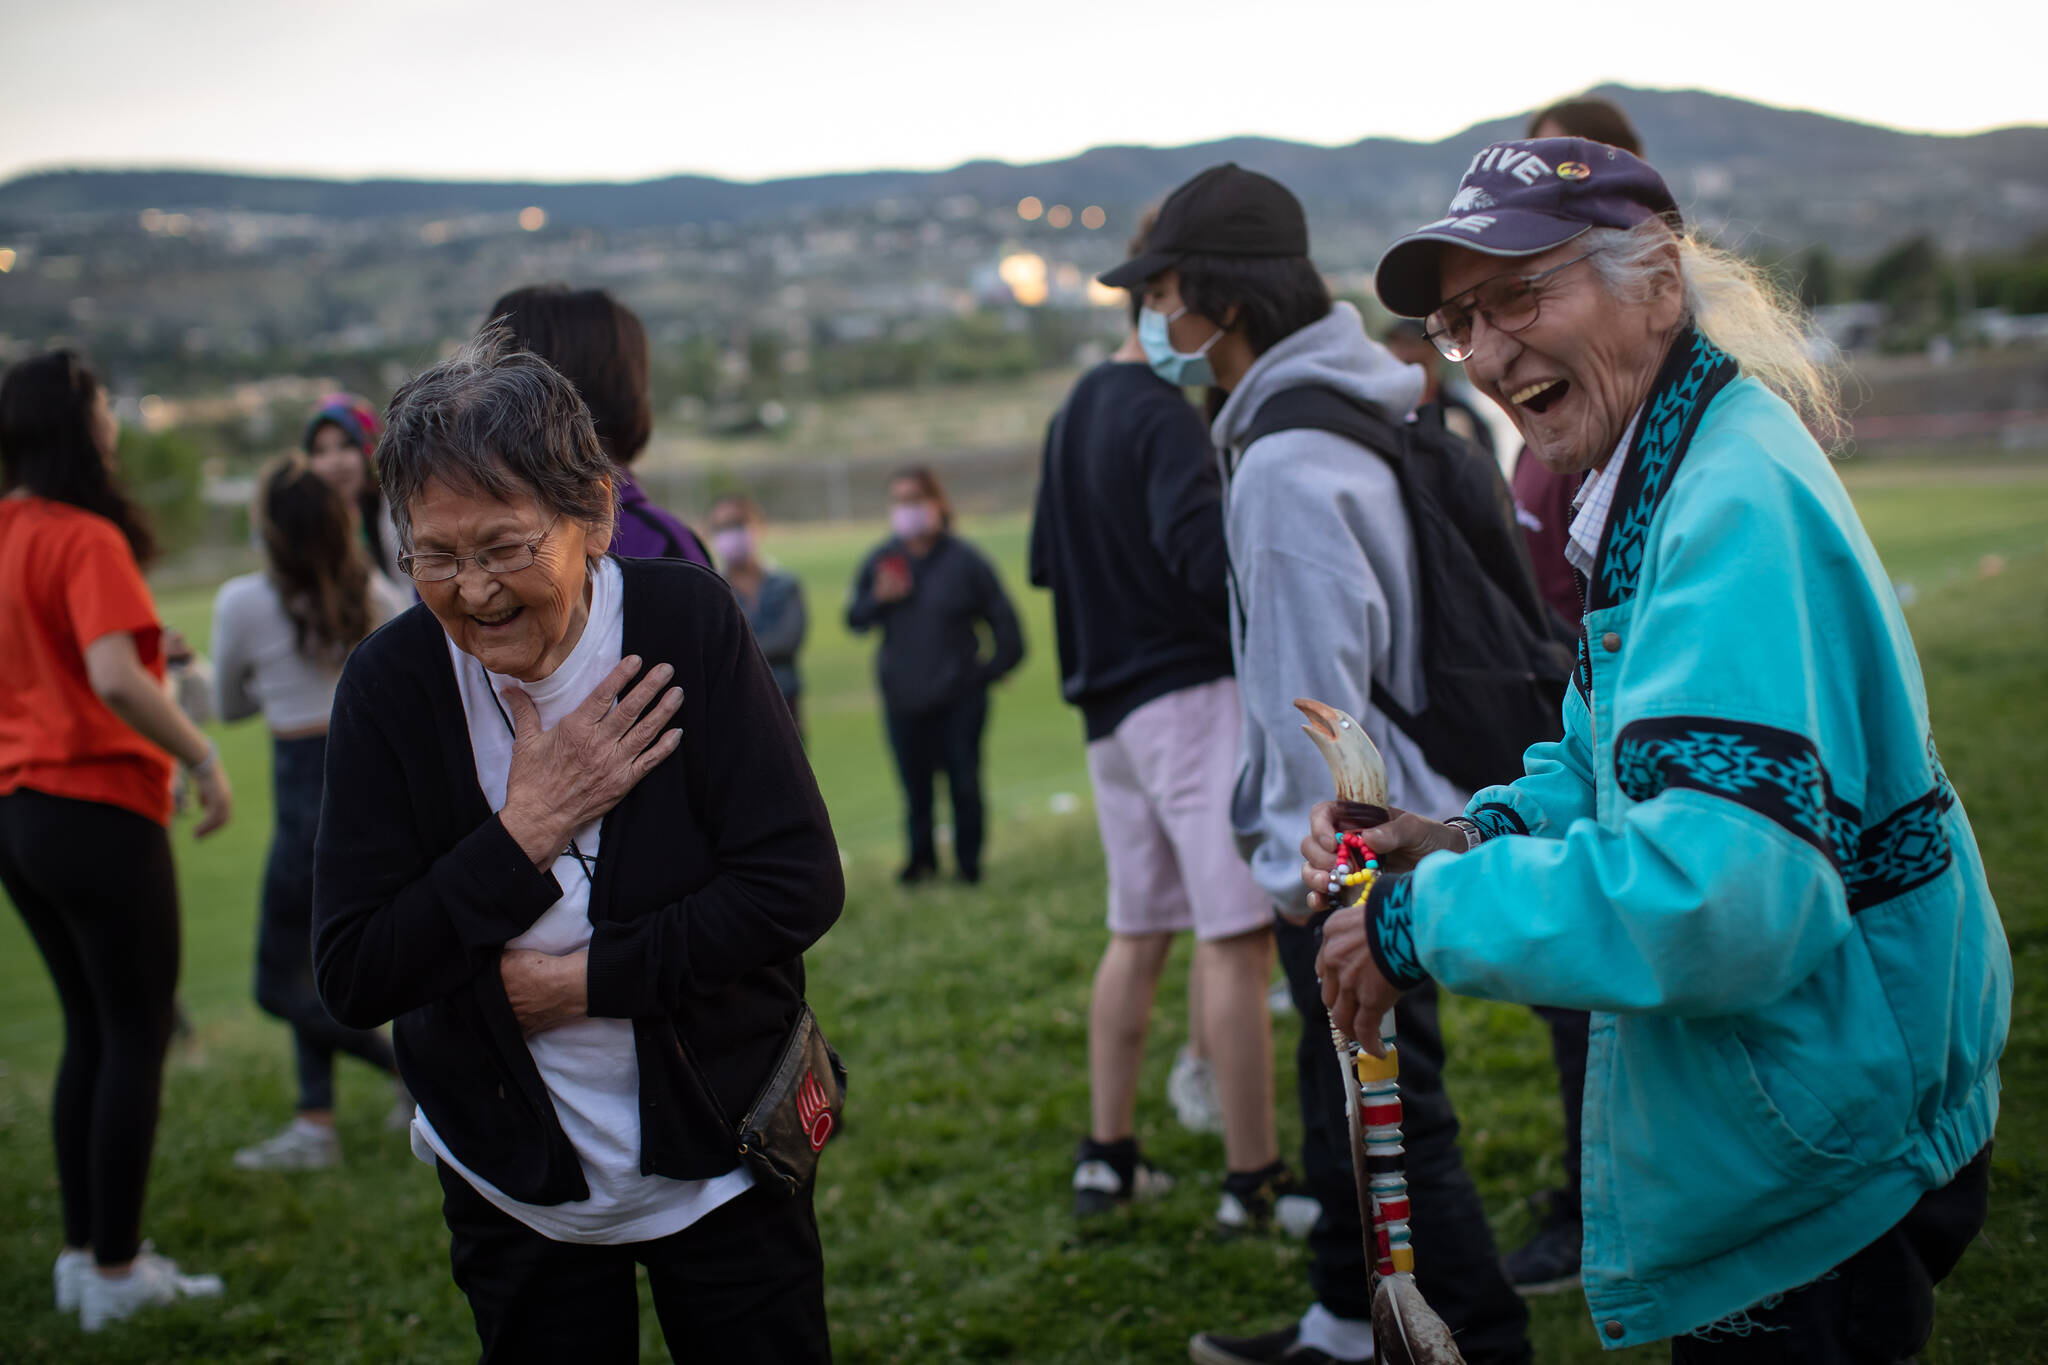 Lejac Residential School survivor Mary Nooski, left, 80, of the Stellat’en First Nation, and Kamloops Indian Residential School survivor Stanley Paul, 75, who was forced into the school when he was 7 and escaped by running away to the United States when he was 16, share a laugh outside the former school, in Kamloops, B.C., on Friday, June 4, 2021. The remains of 215 children have been discovered buried near the former school. THE CANADIAN PRESS/Darryl Dyck